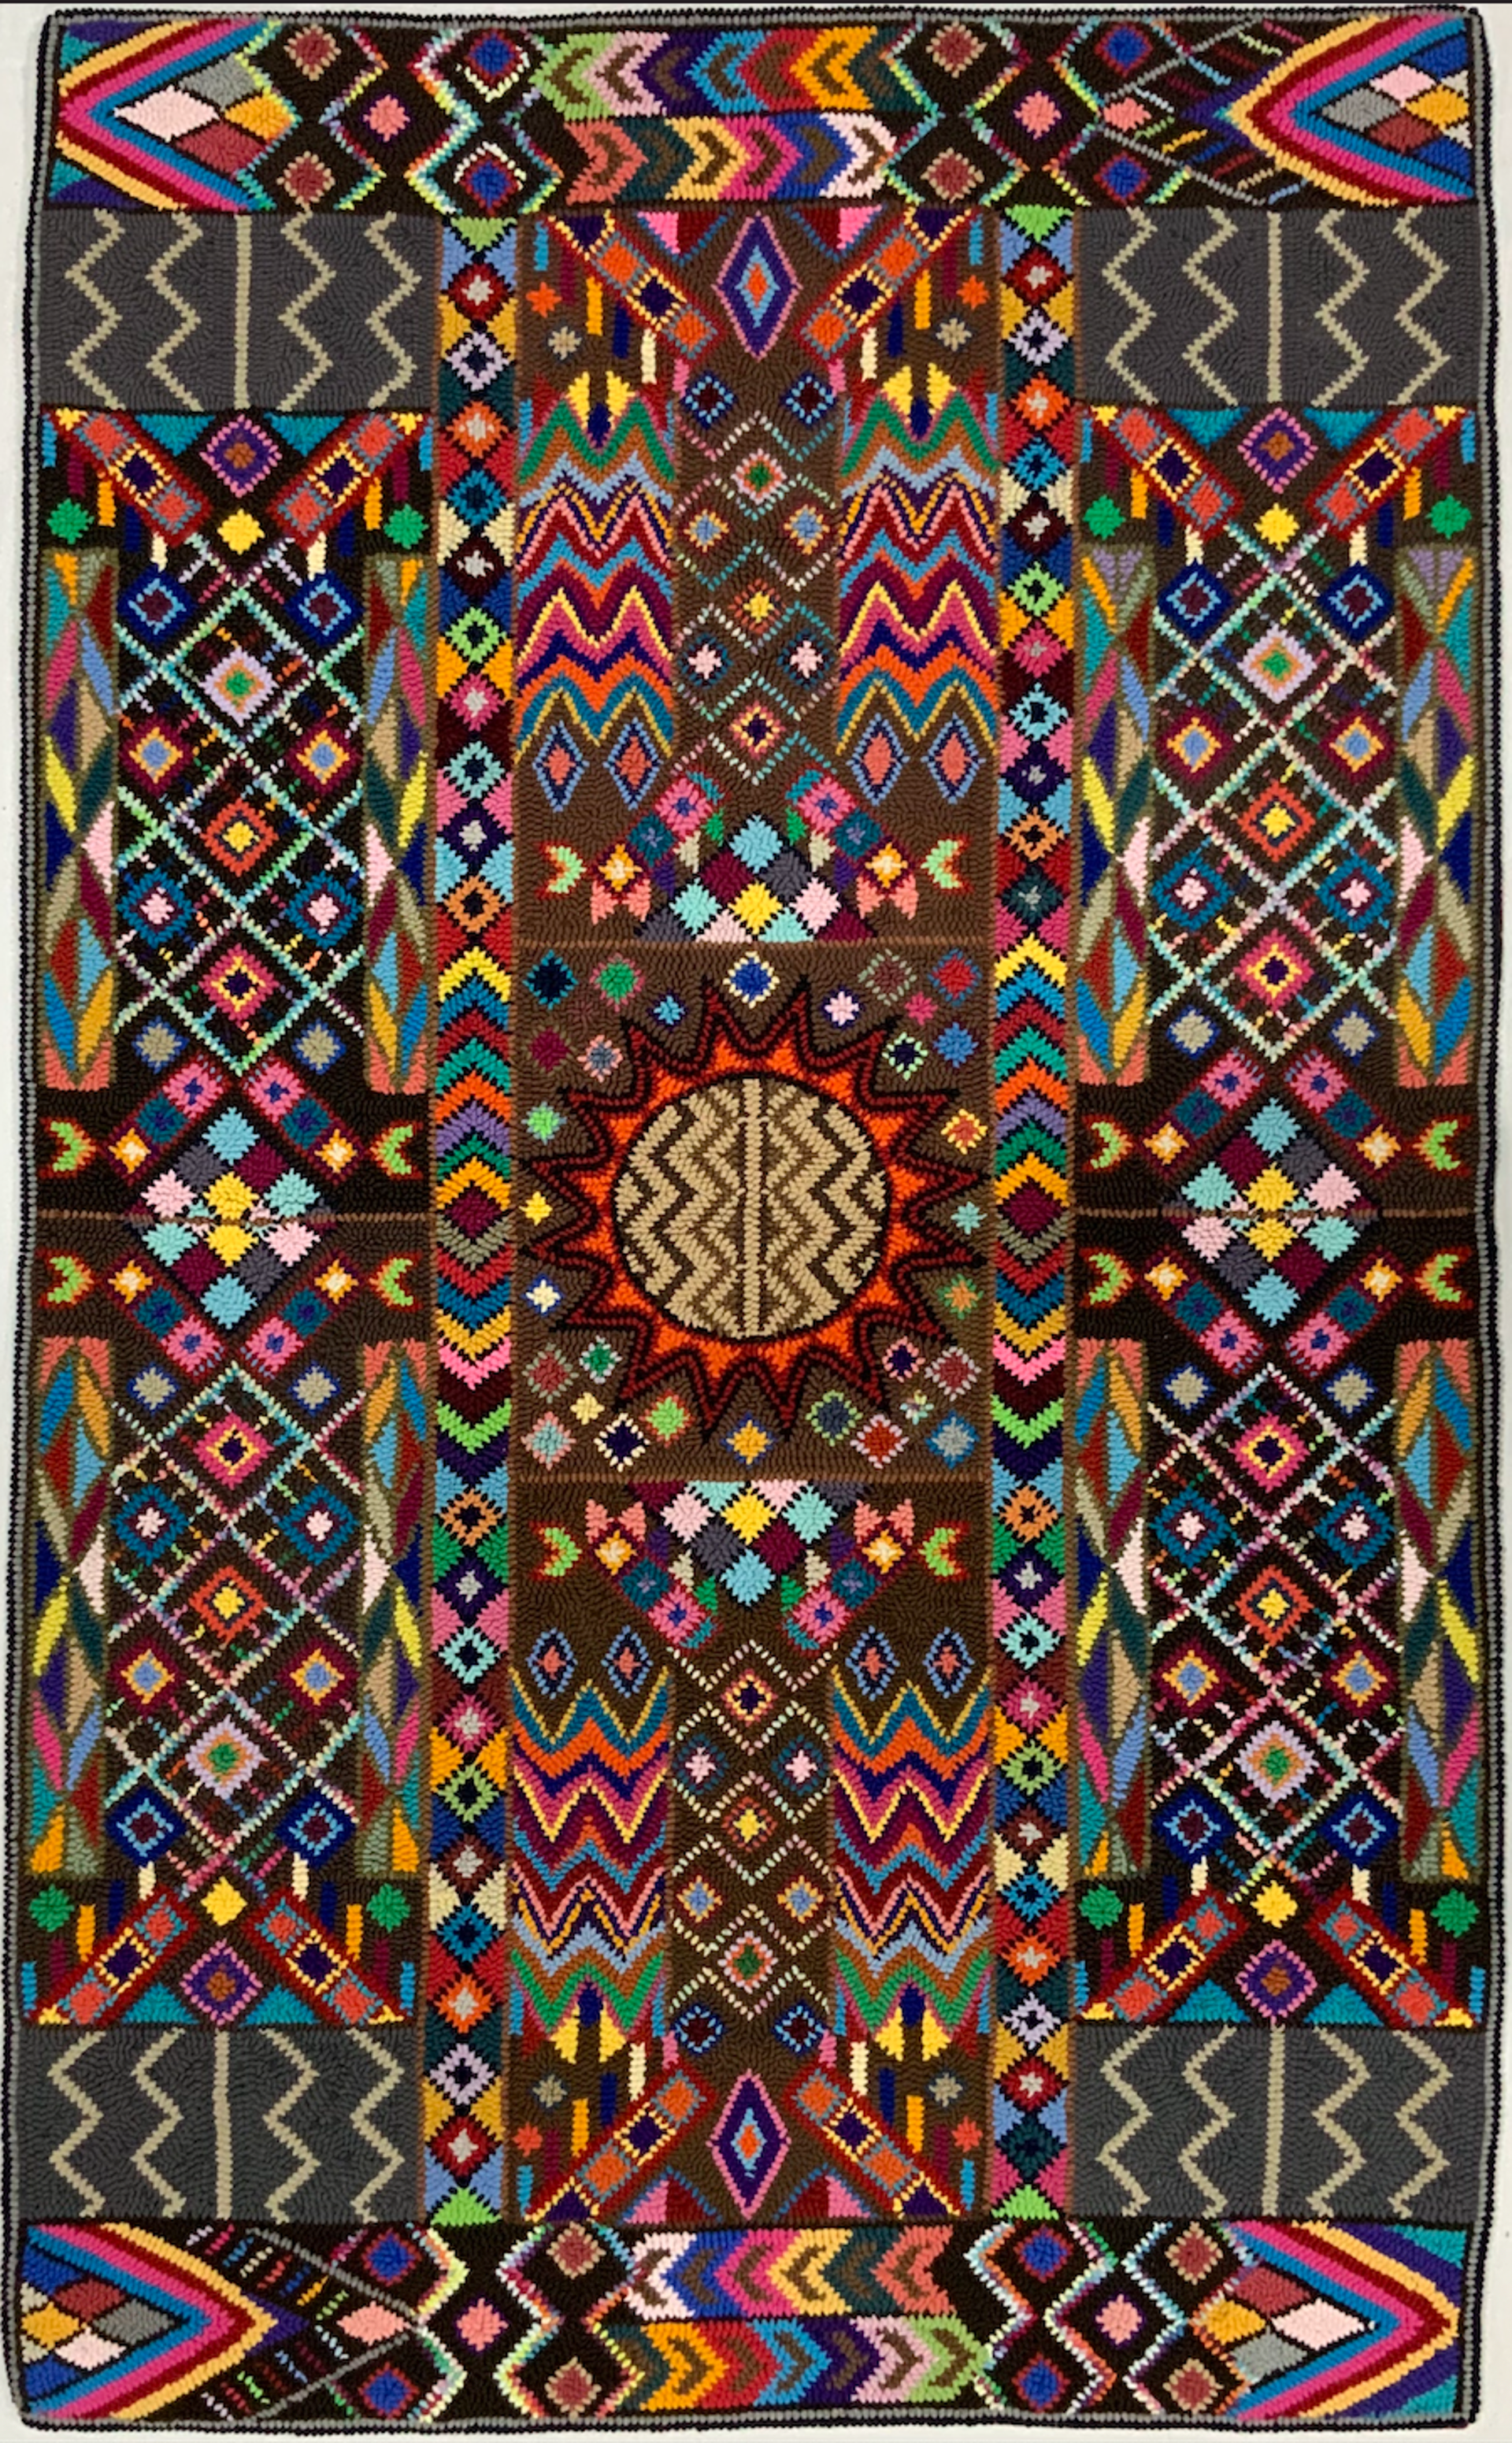 Clavikot: Sacred Designs by Multicolores